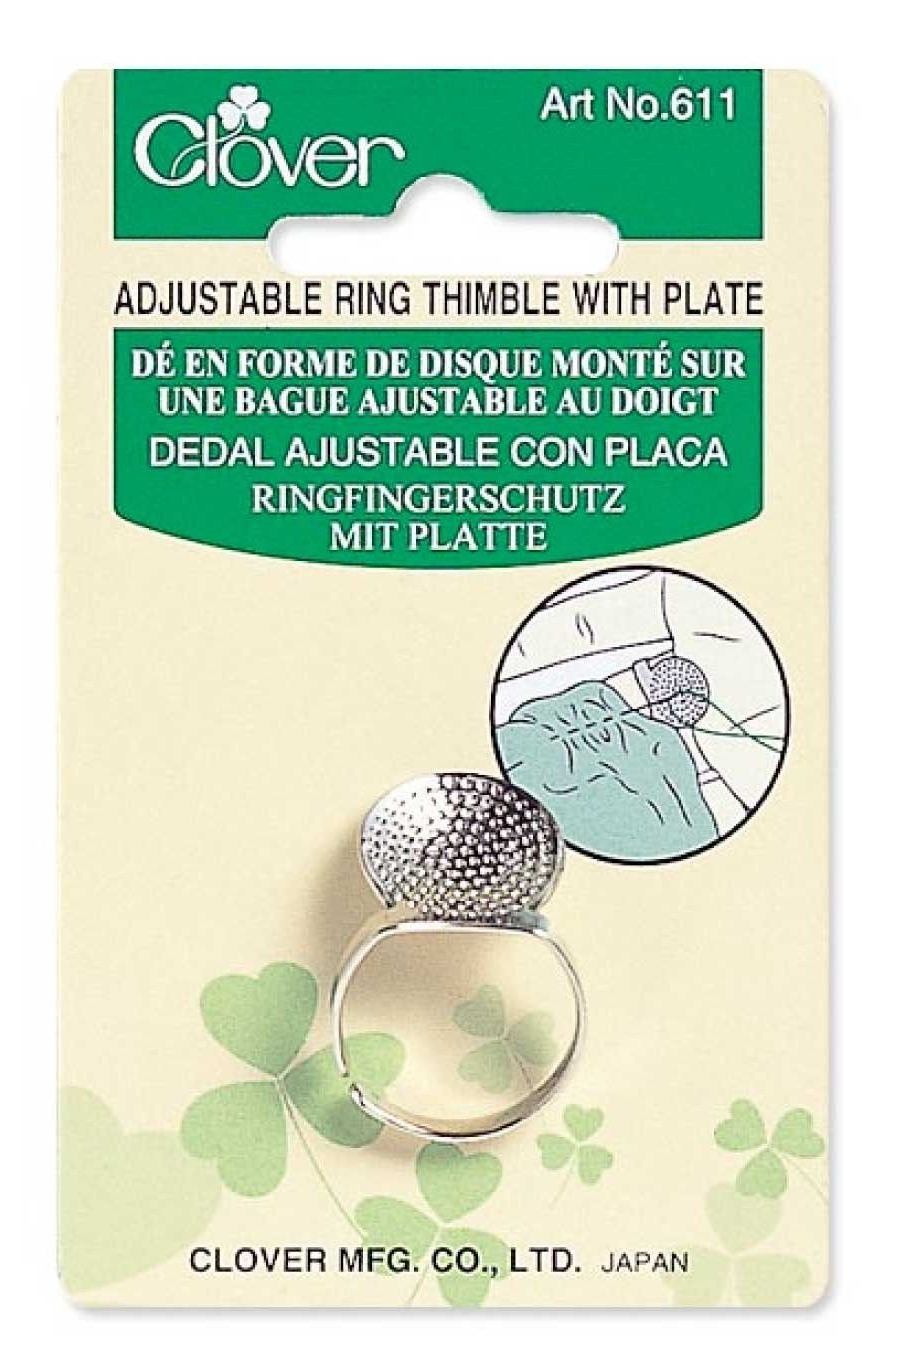 Clover - Adjustable Ring Thimble with Plate